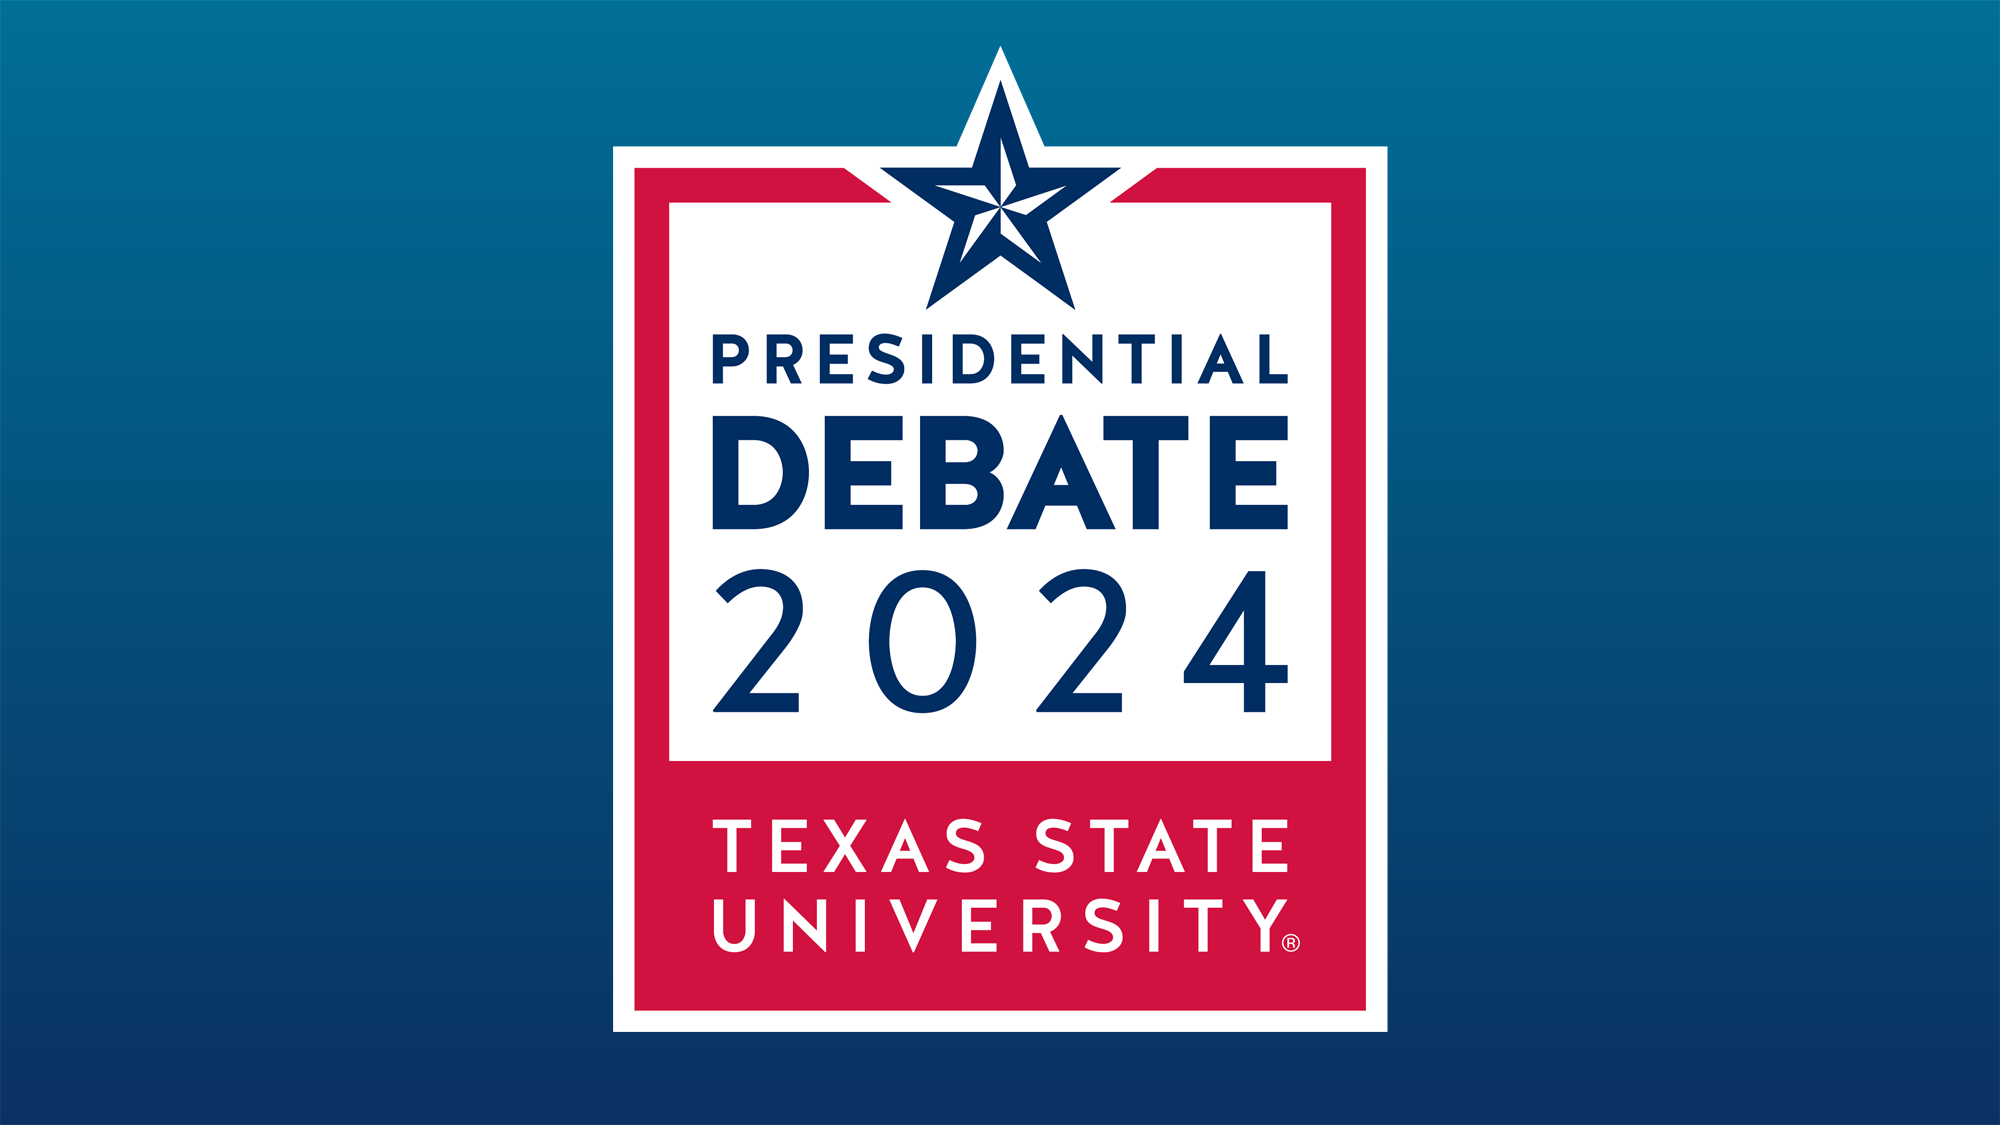 graphic with blue gradient background reading "presidential debate 2024 Texas State University"